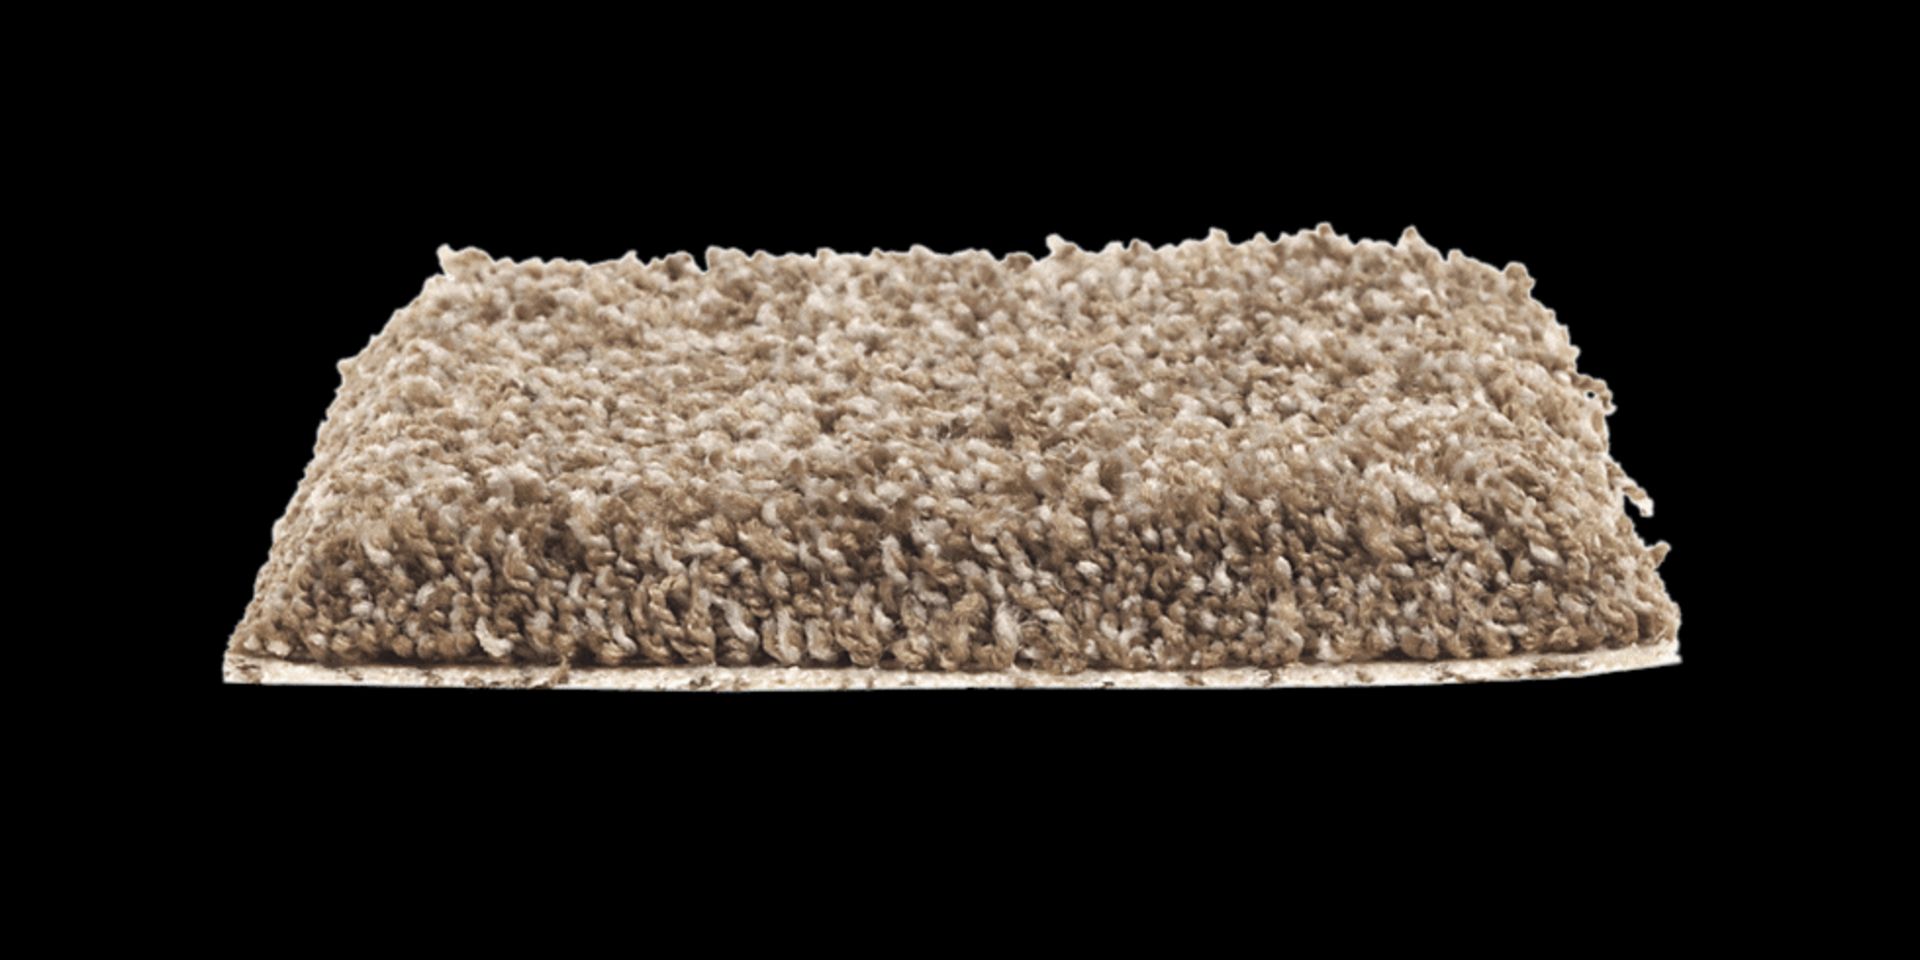 Mohawk Vivid Statement - Thatched Roof  Tough, stylishly soft and easy to clean. Best for moderate